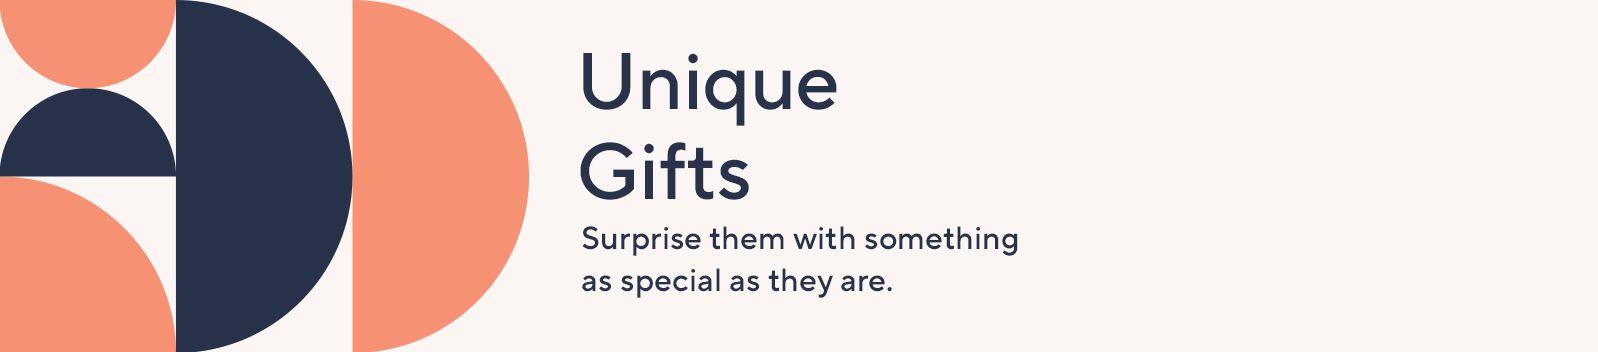 Unique Gifts: Surprise them with something as special as they are.